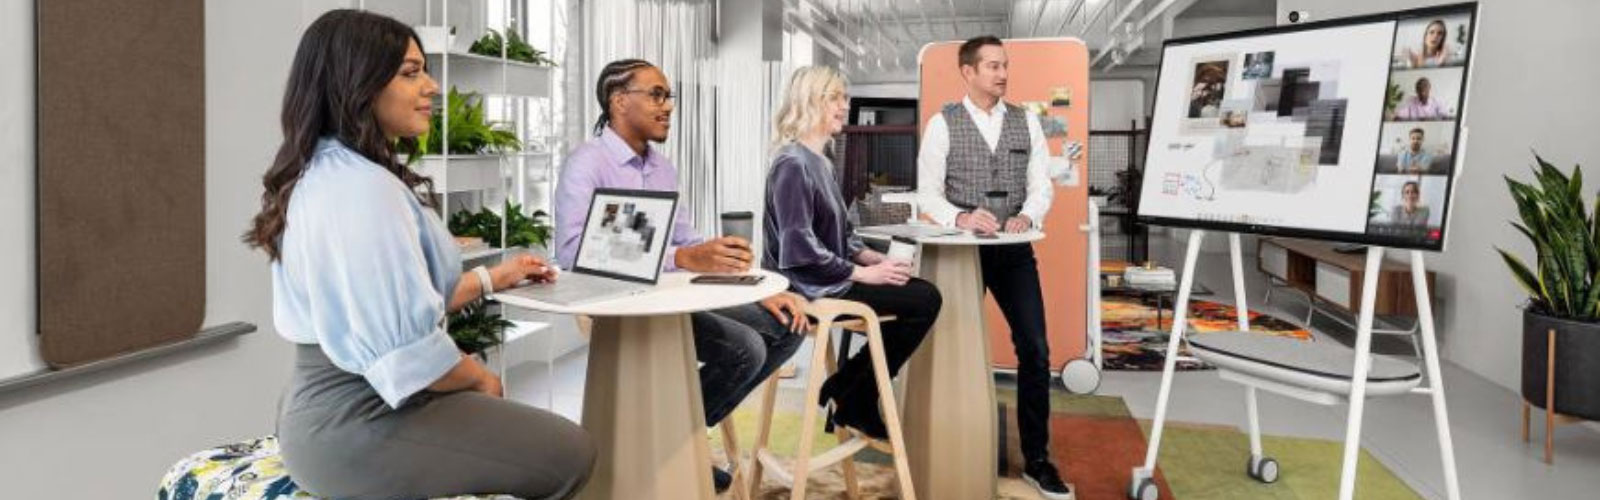 Office workers utilising modern technology video conferencing for collaboration